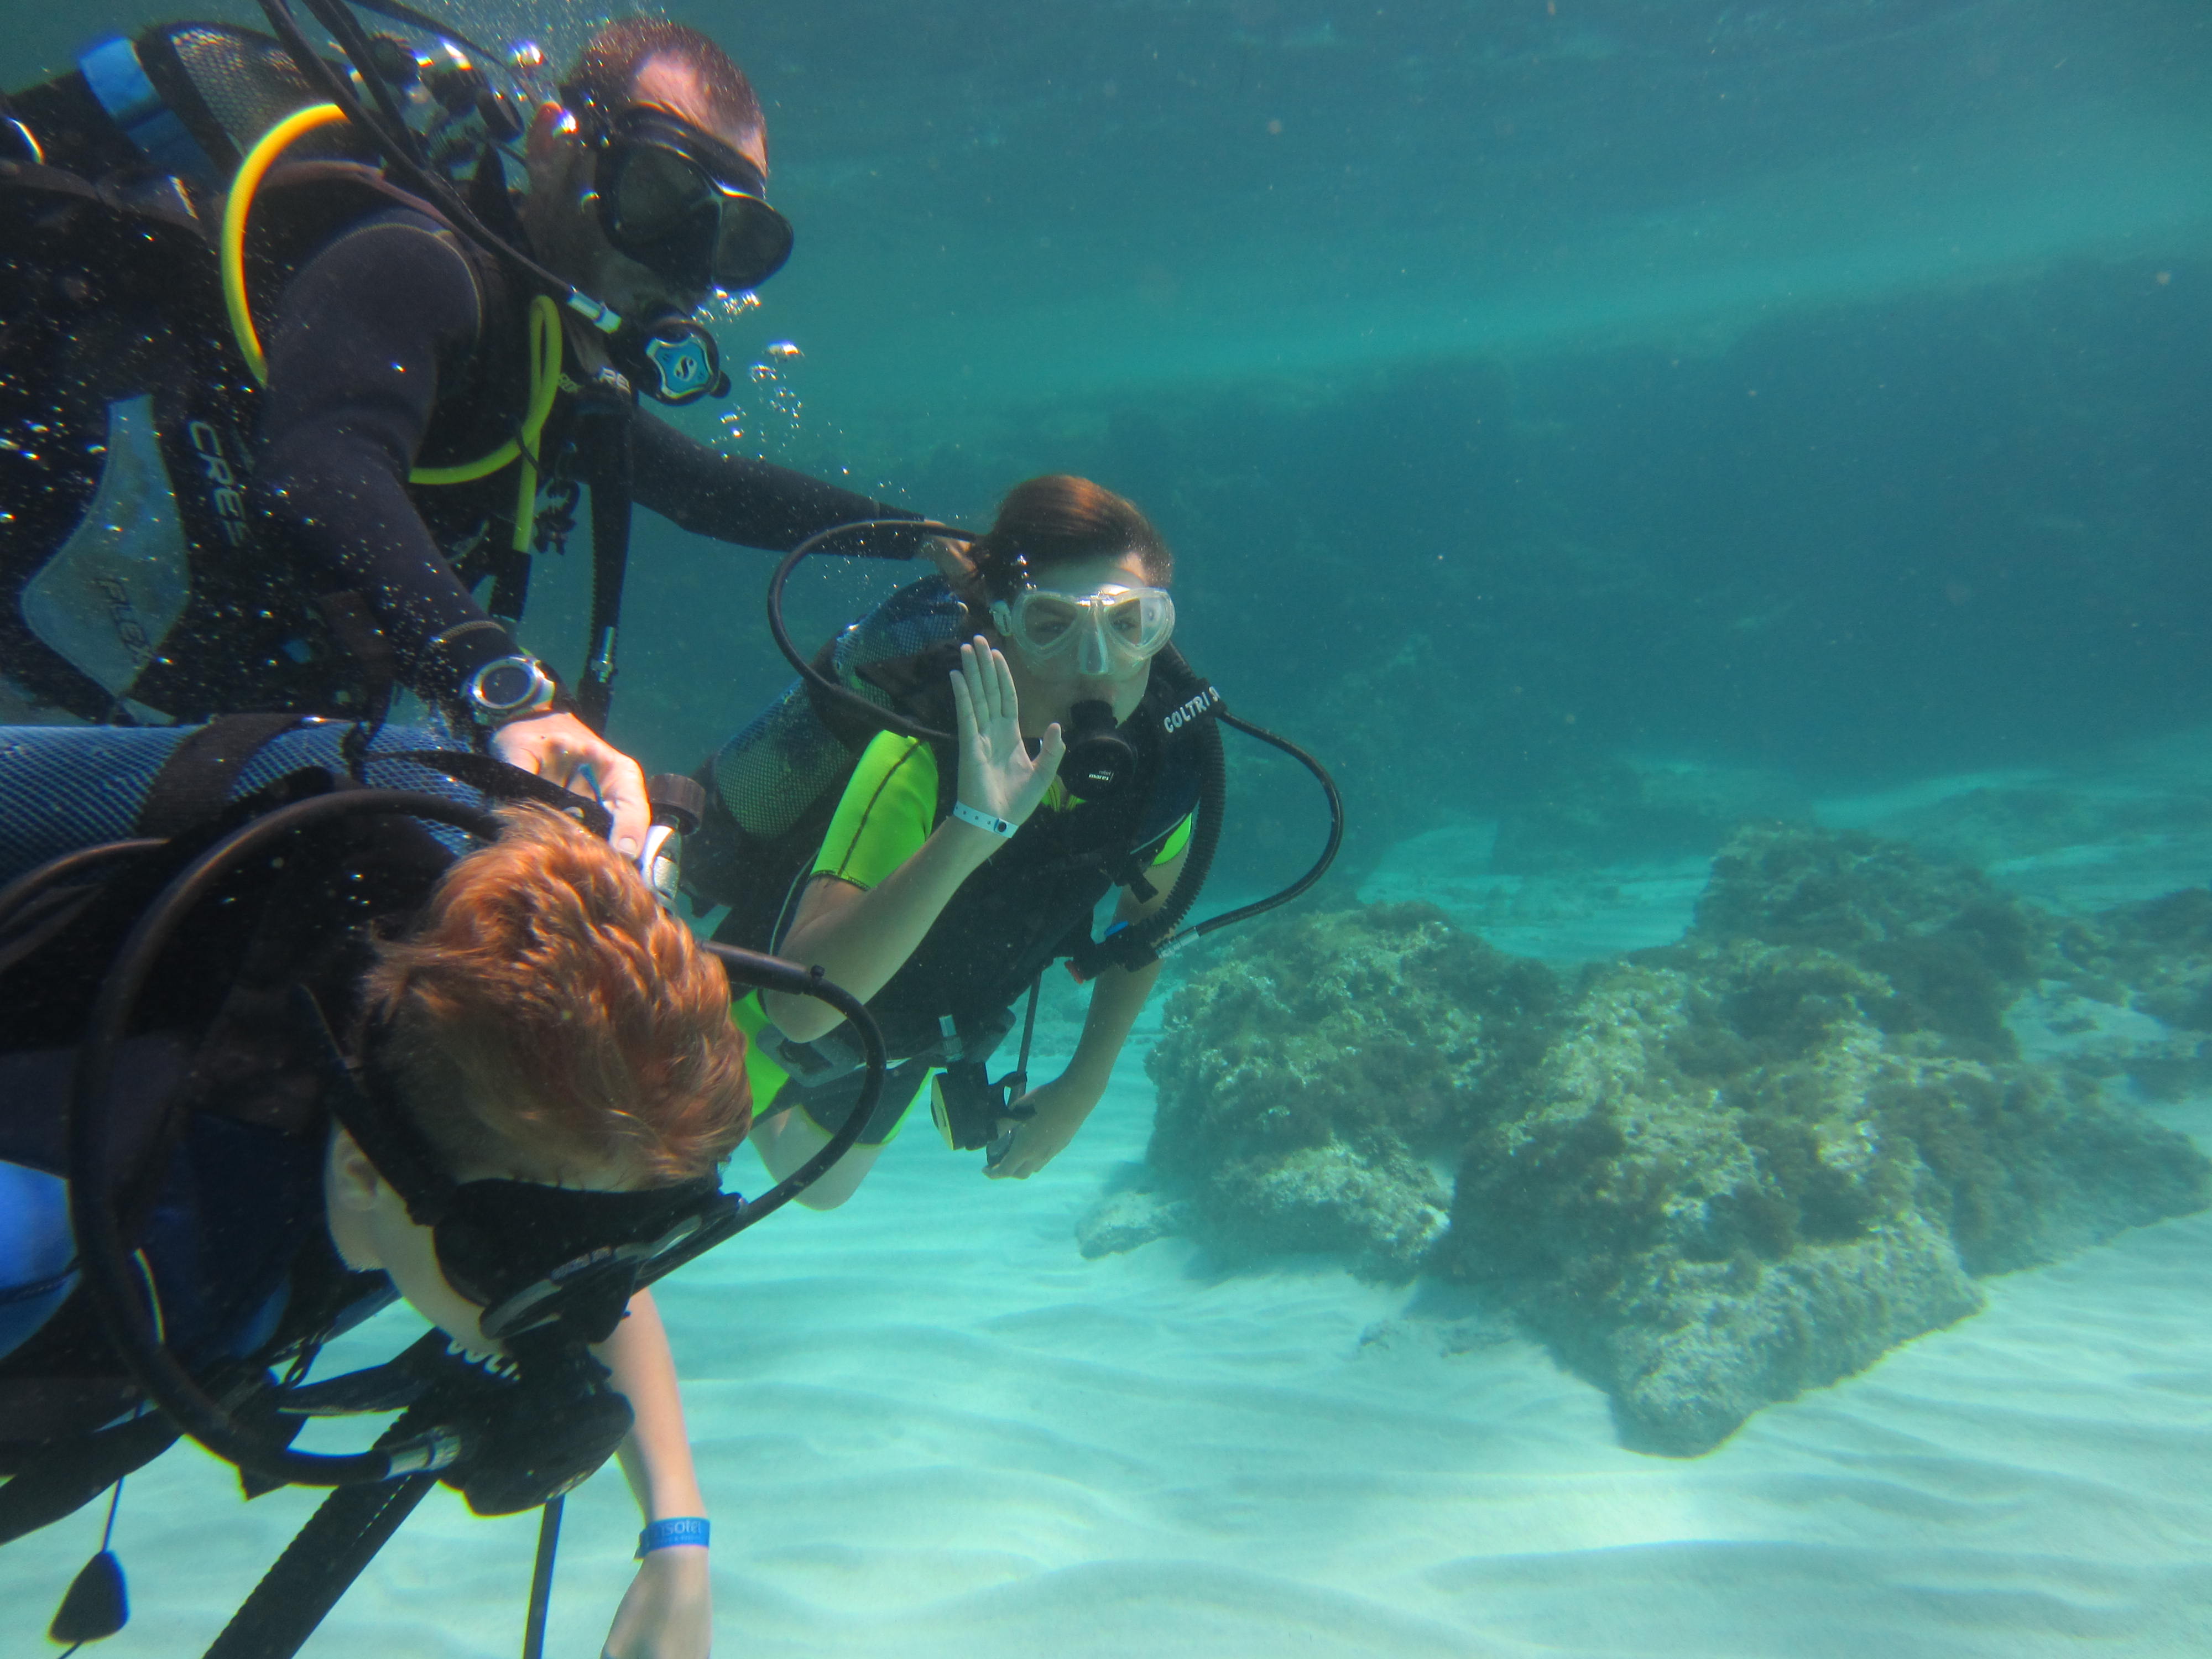 Diving with your dive buddy in Formentera